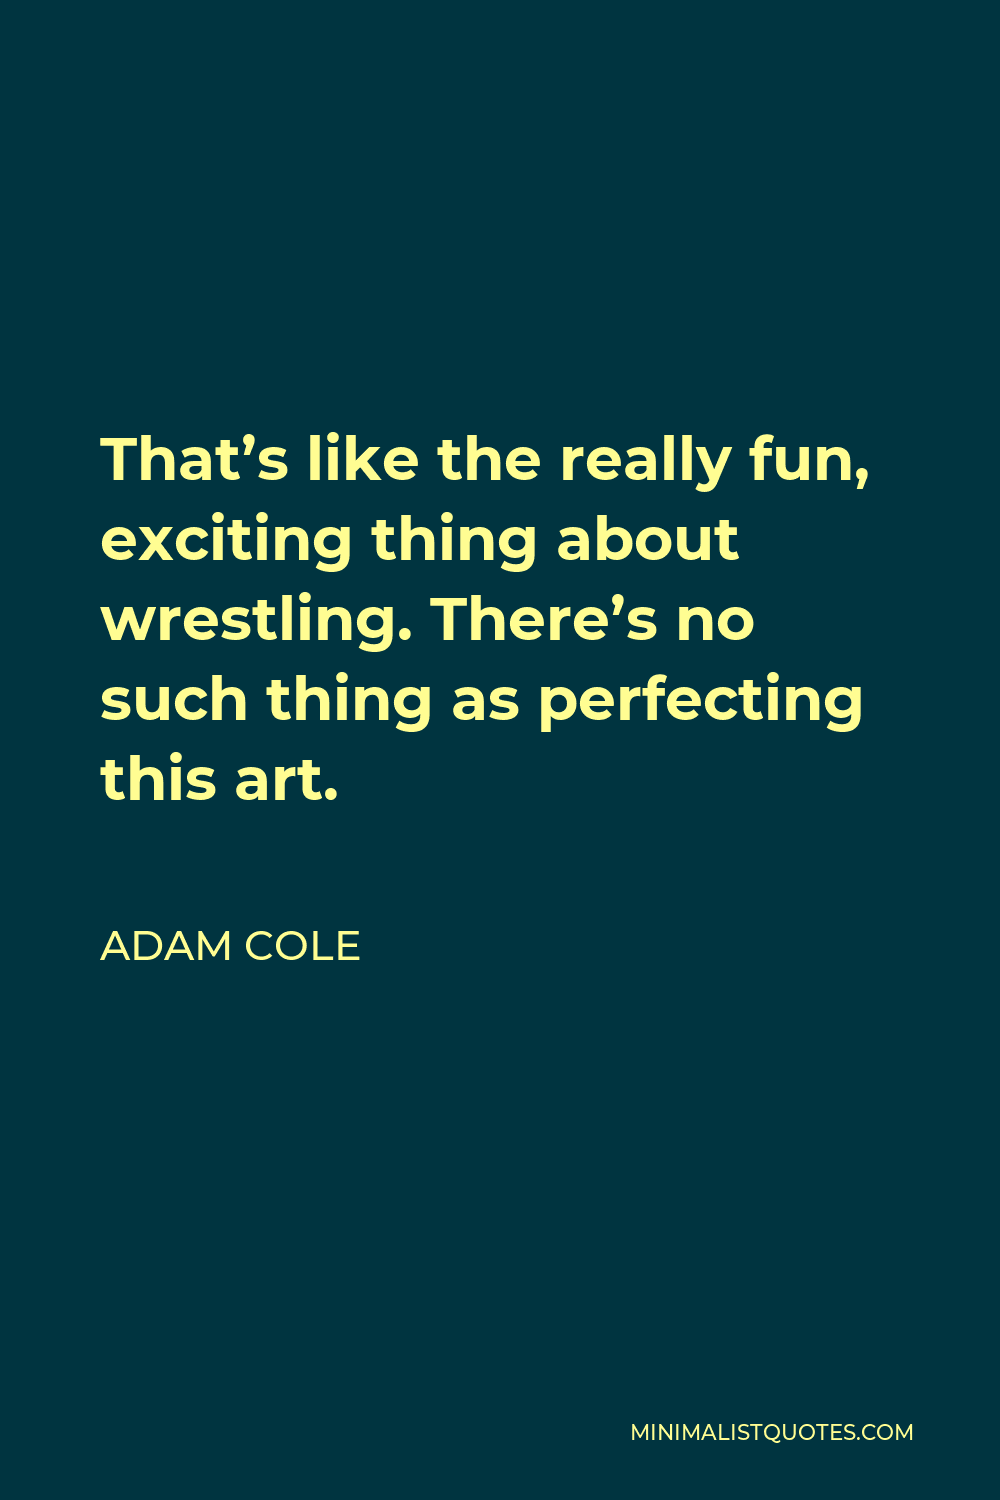 Adam Cole Quote - That’s like the really fun, exciting thing about wrestling. There’s no such thing as perfecting this art.